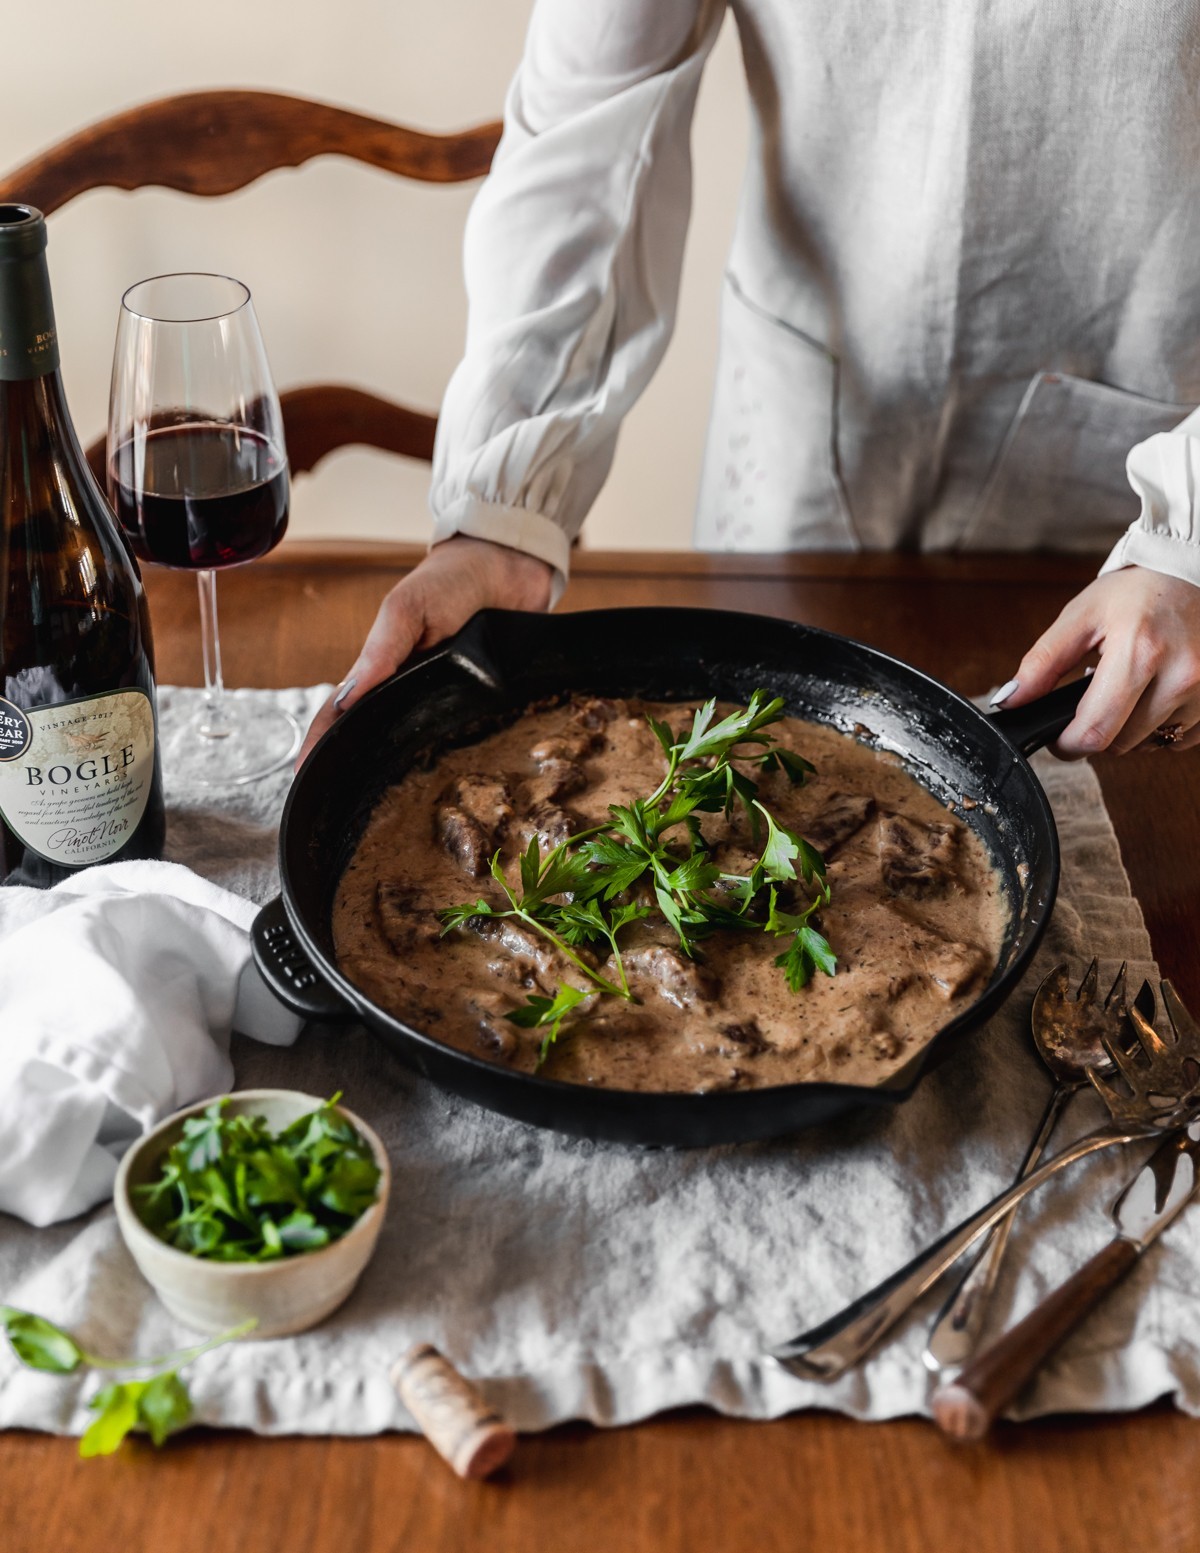 A side image of a woman wearing a white flowly long sleeve shirt and beige linen apron holding a black cast iron pan of beef stroganoff with shallots and brandy garnished with parsley. The pan is on a beige linen on a wood table next to vintage utensils, a white bowl of parsley, a white linen, a bottle of wine, and a glass of red wine.